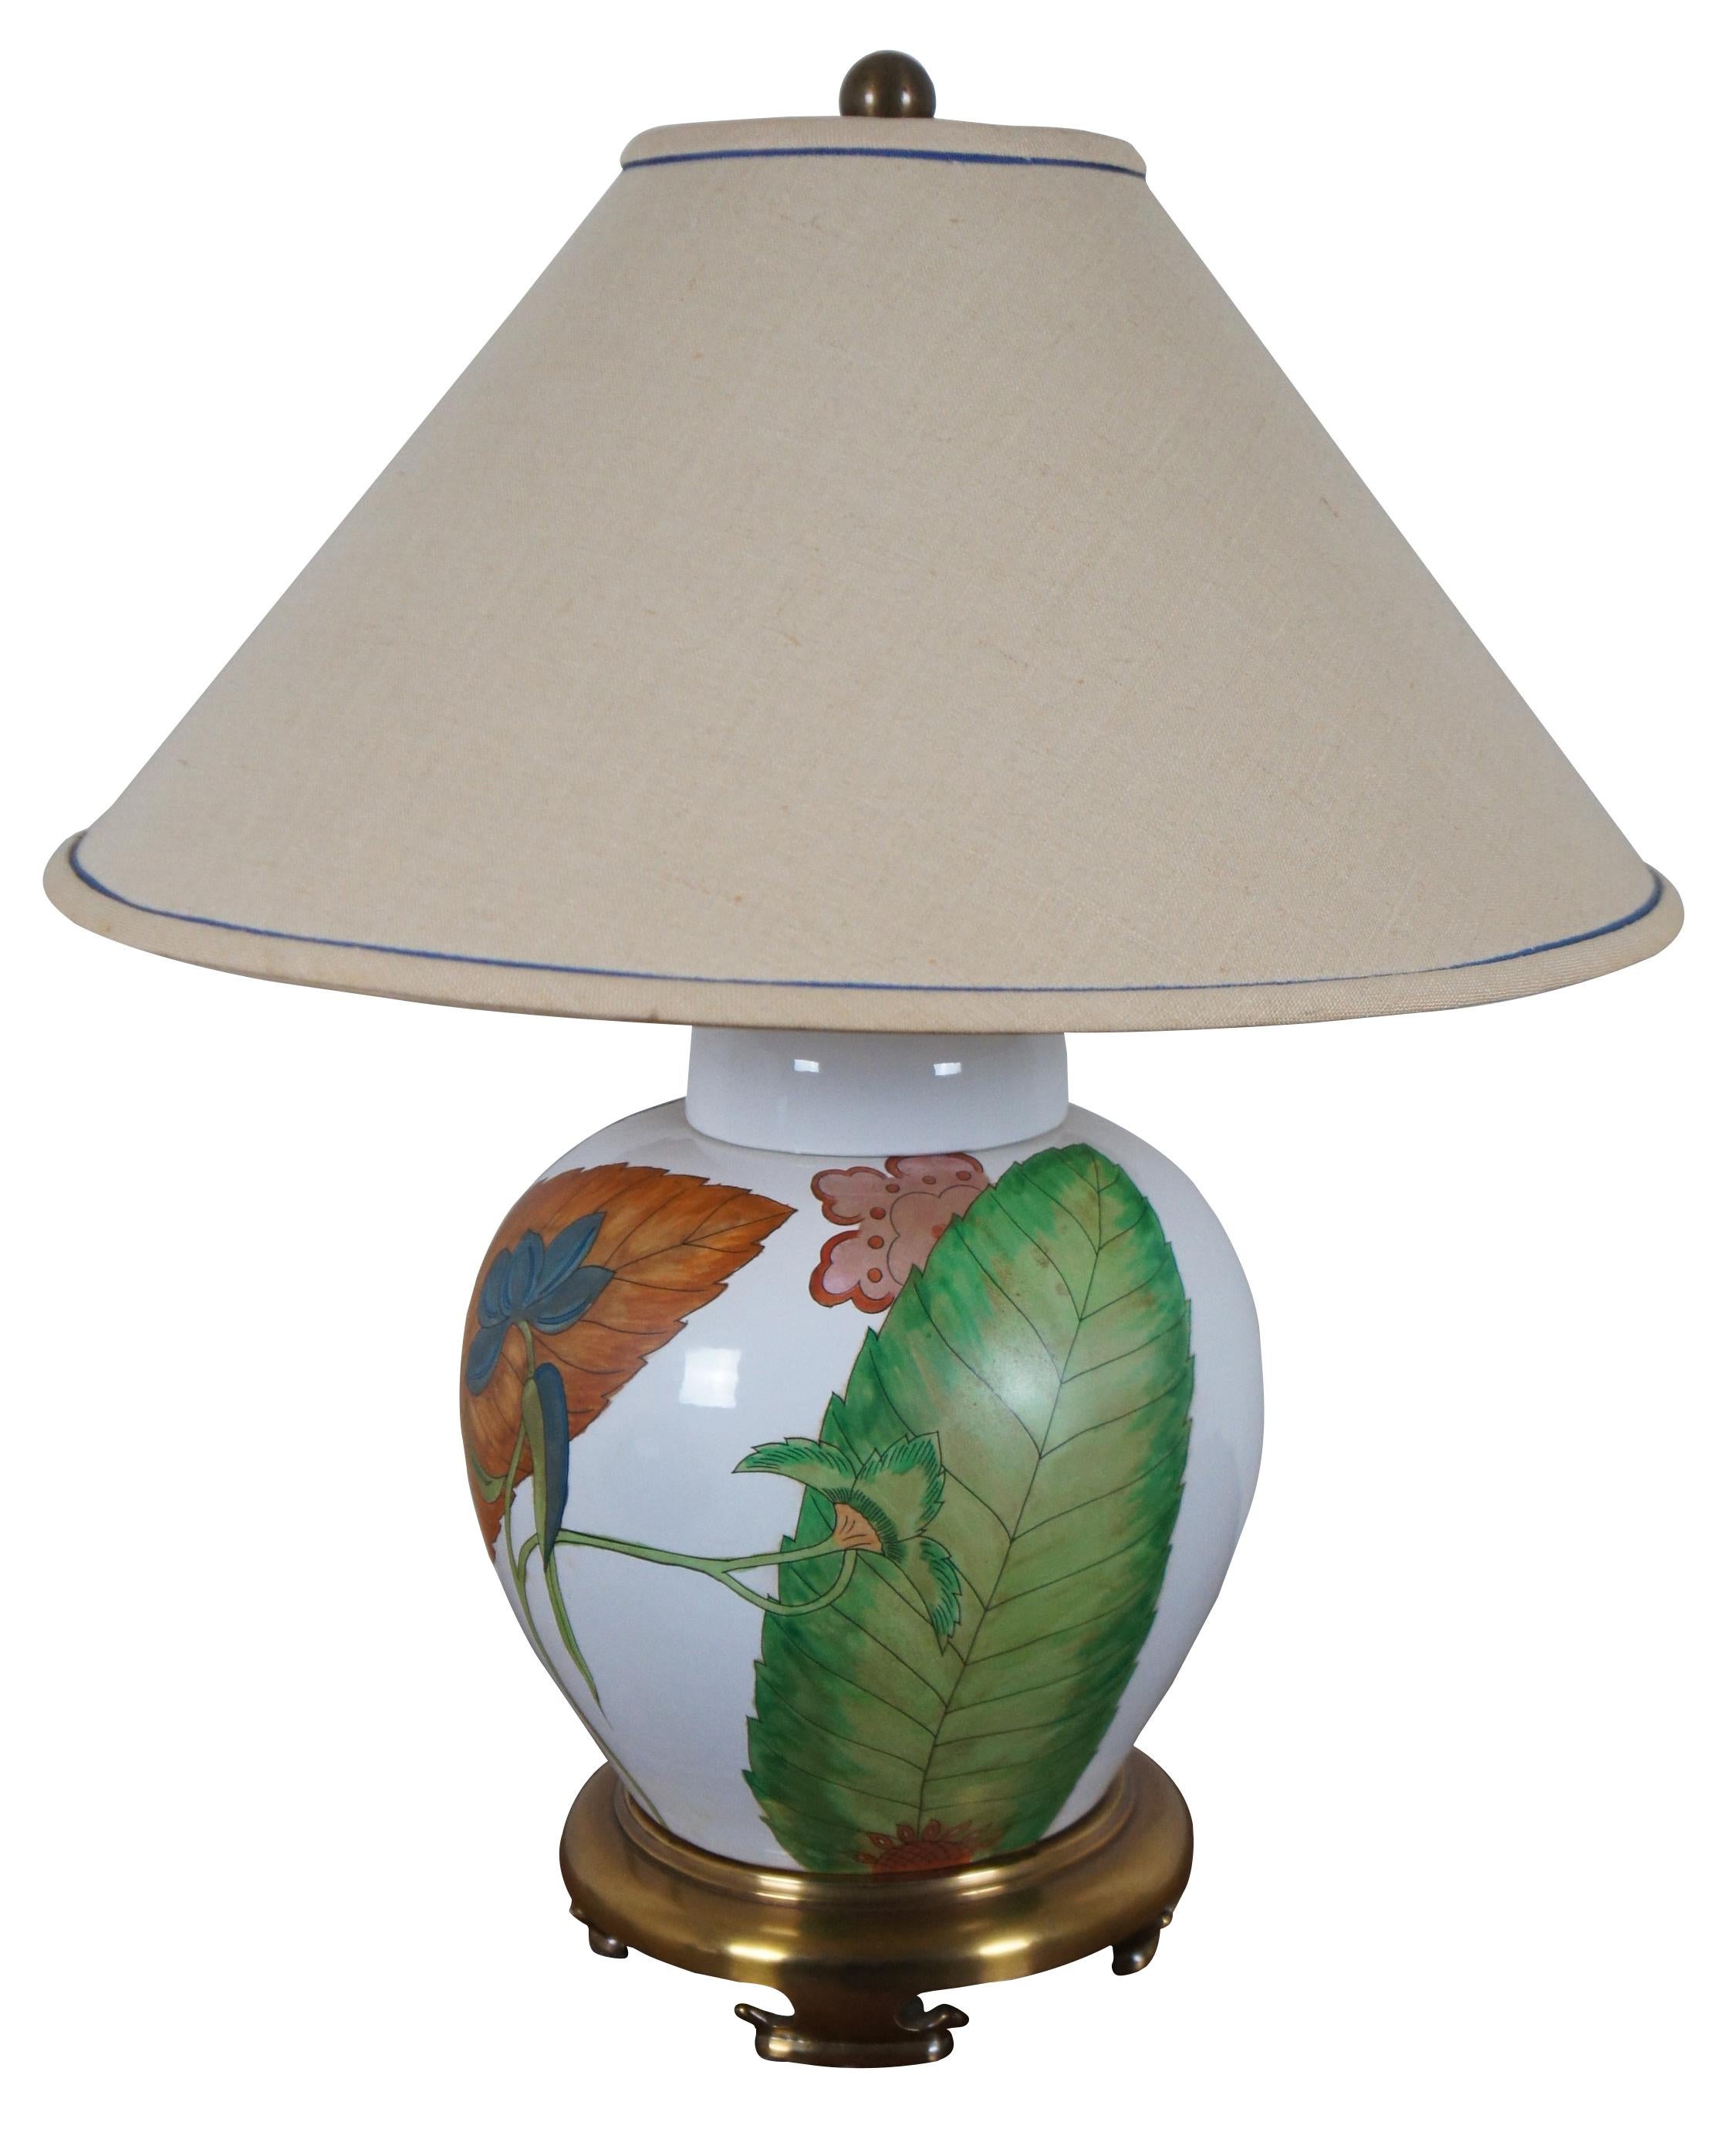 Vintage Chapman ginger jar table lamp circa 1980’s; white glazed porcelain with orange, blue, pink and green matte painted leaves and flowers, brass base and finial.

Measures: 11” x 18.5” / Shade - 21.25” x 9.5” / Height to Top of Finial – 26.5”